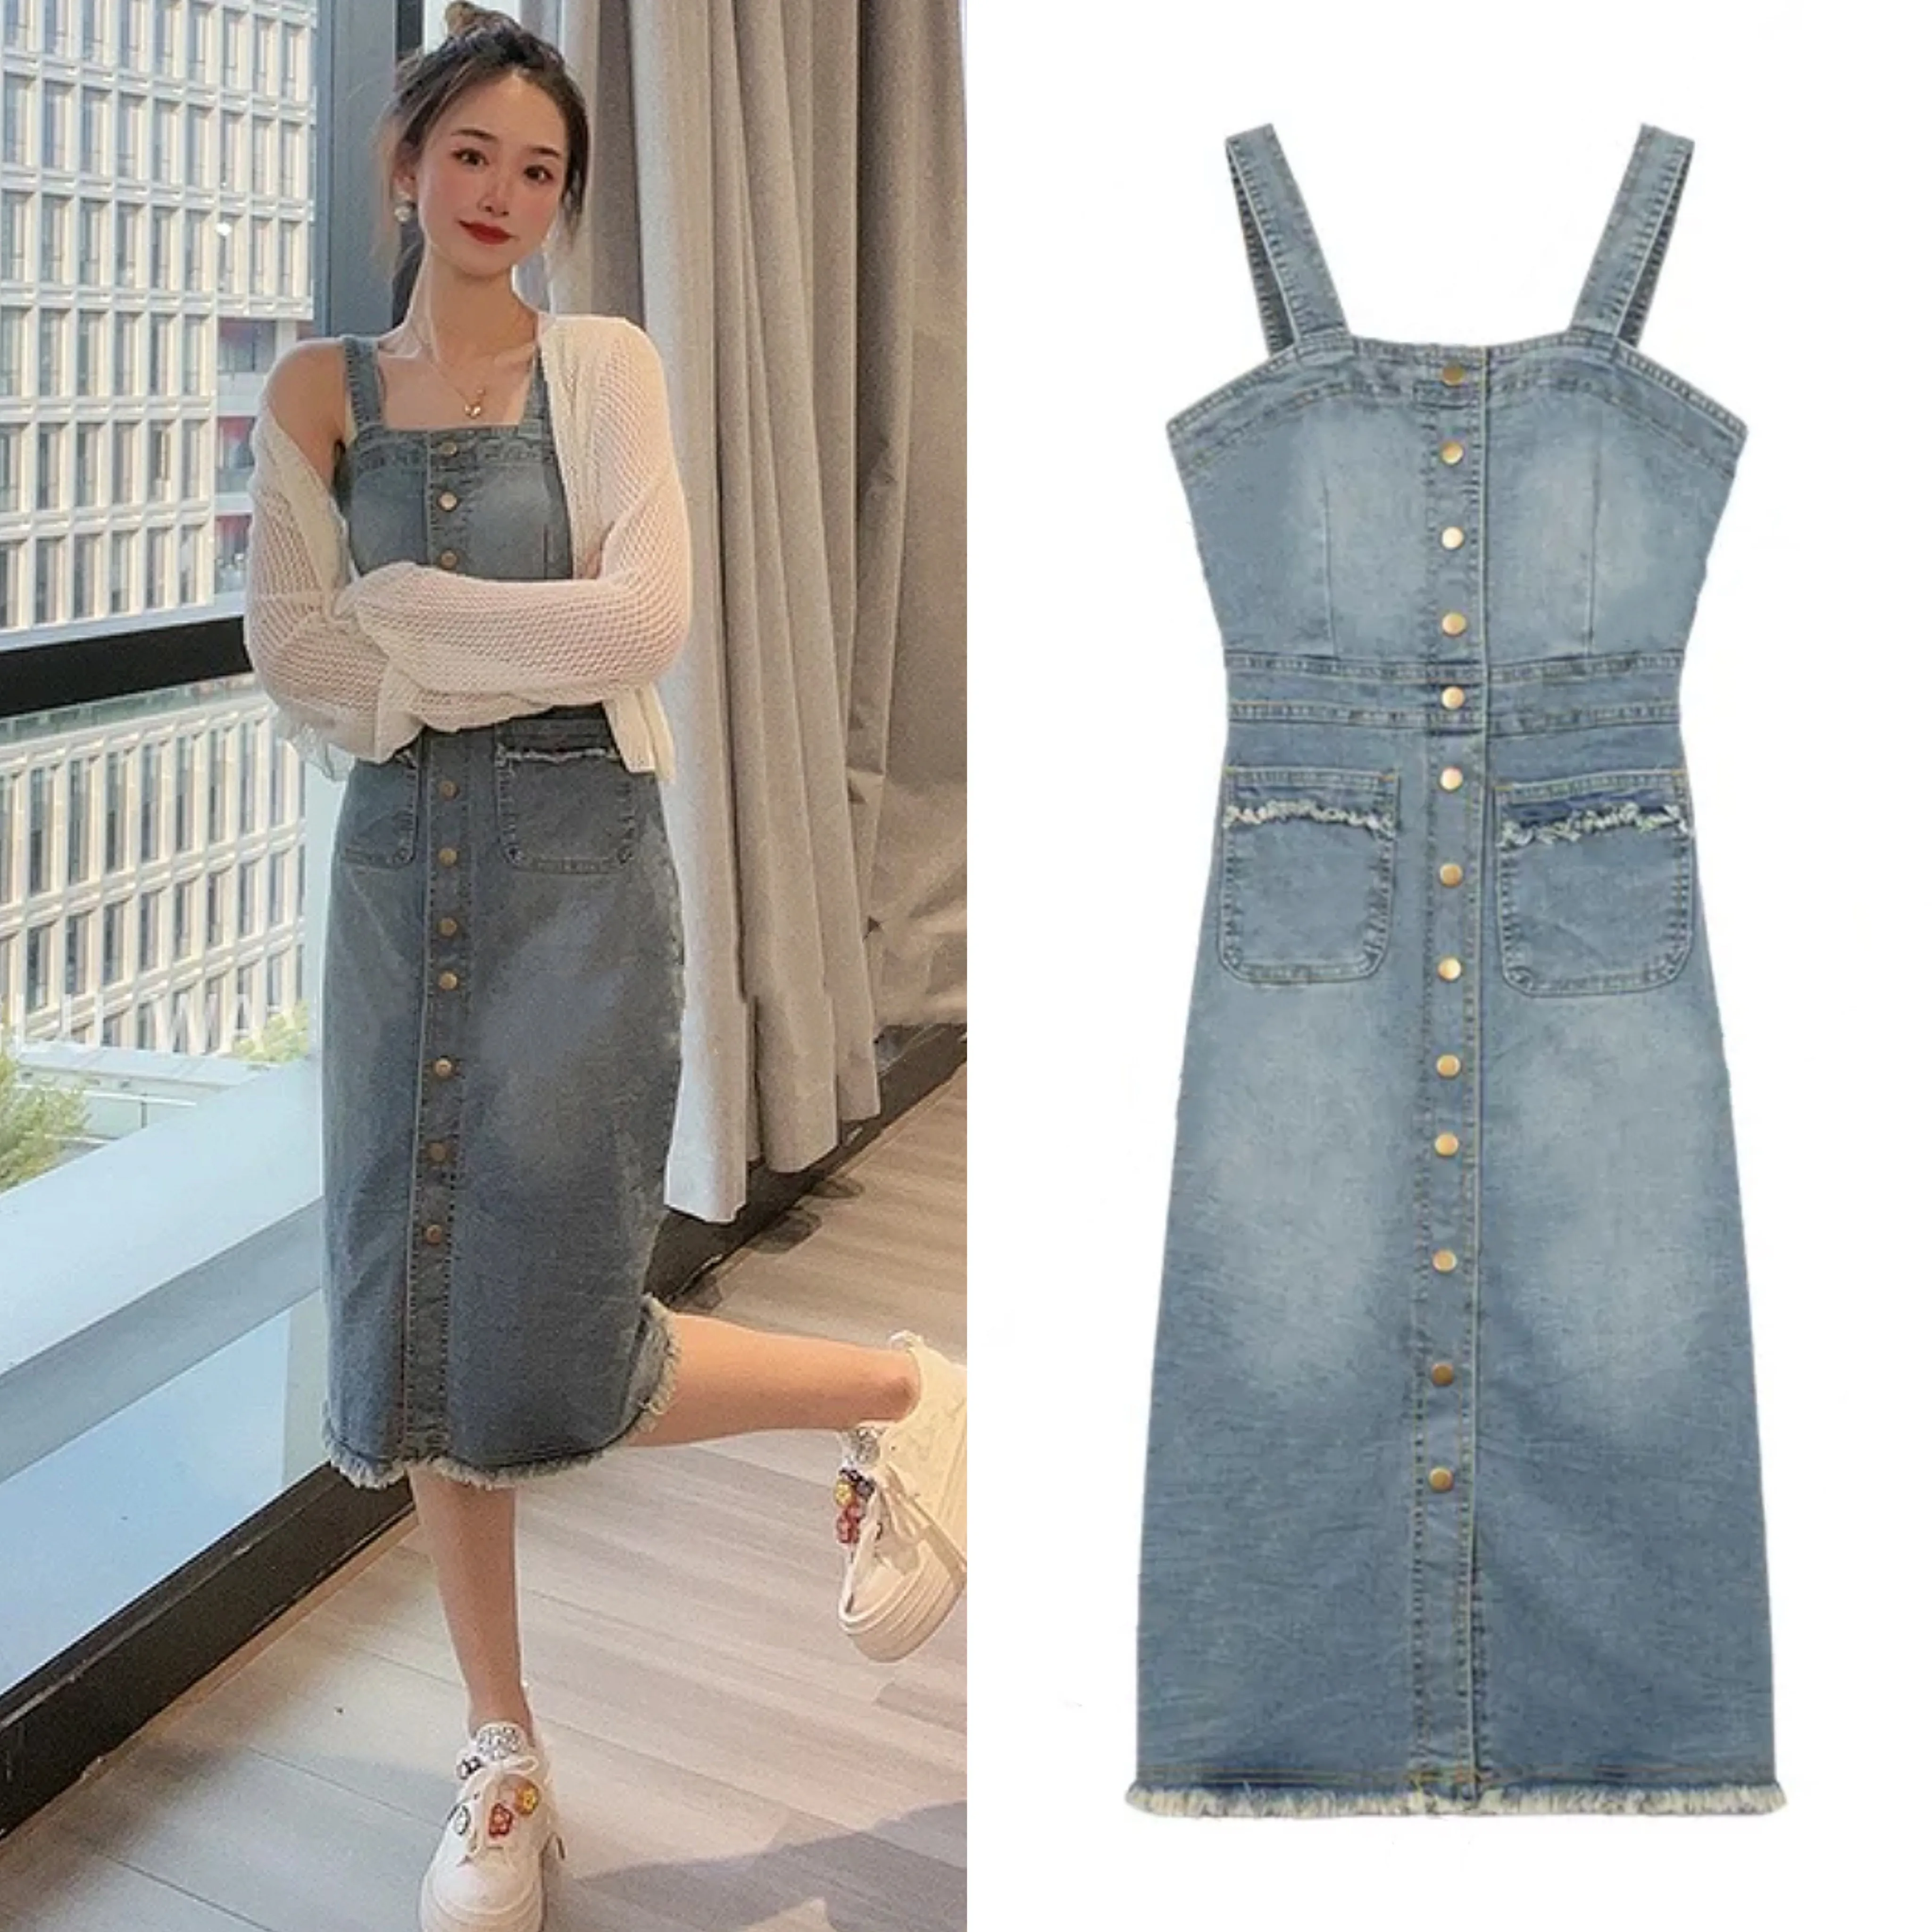 Govt-Recognised Embroidery Courses to Design Denim Dresses!